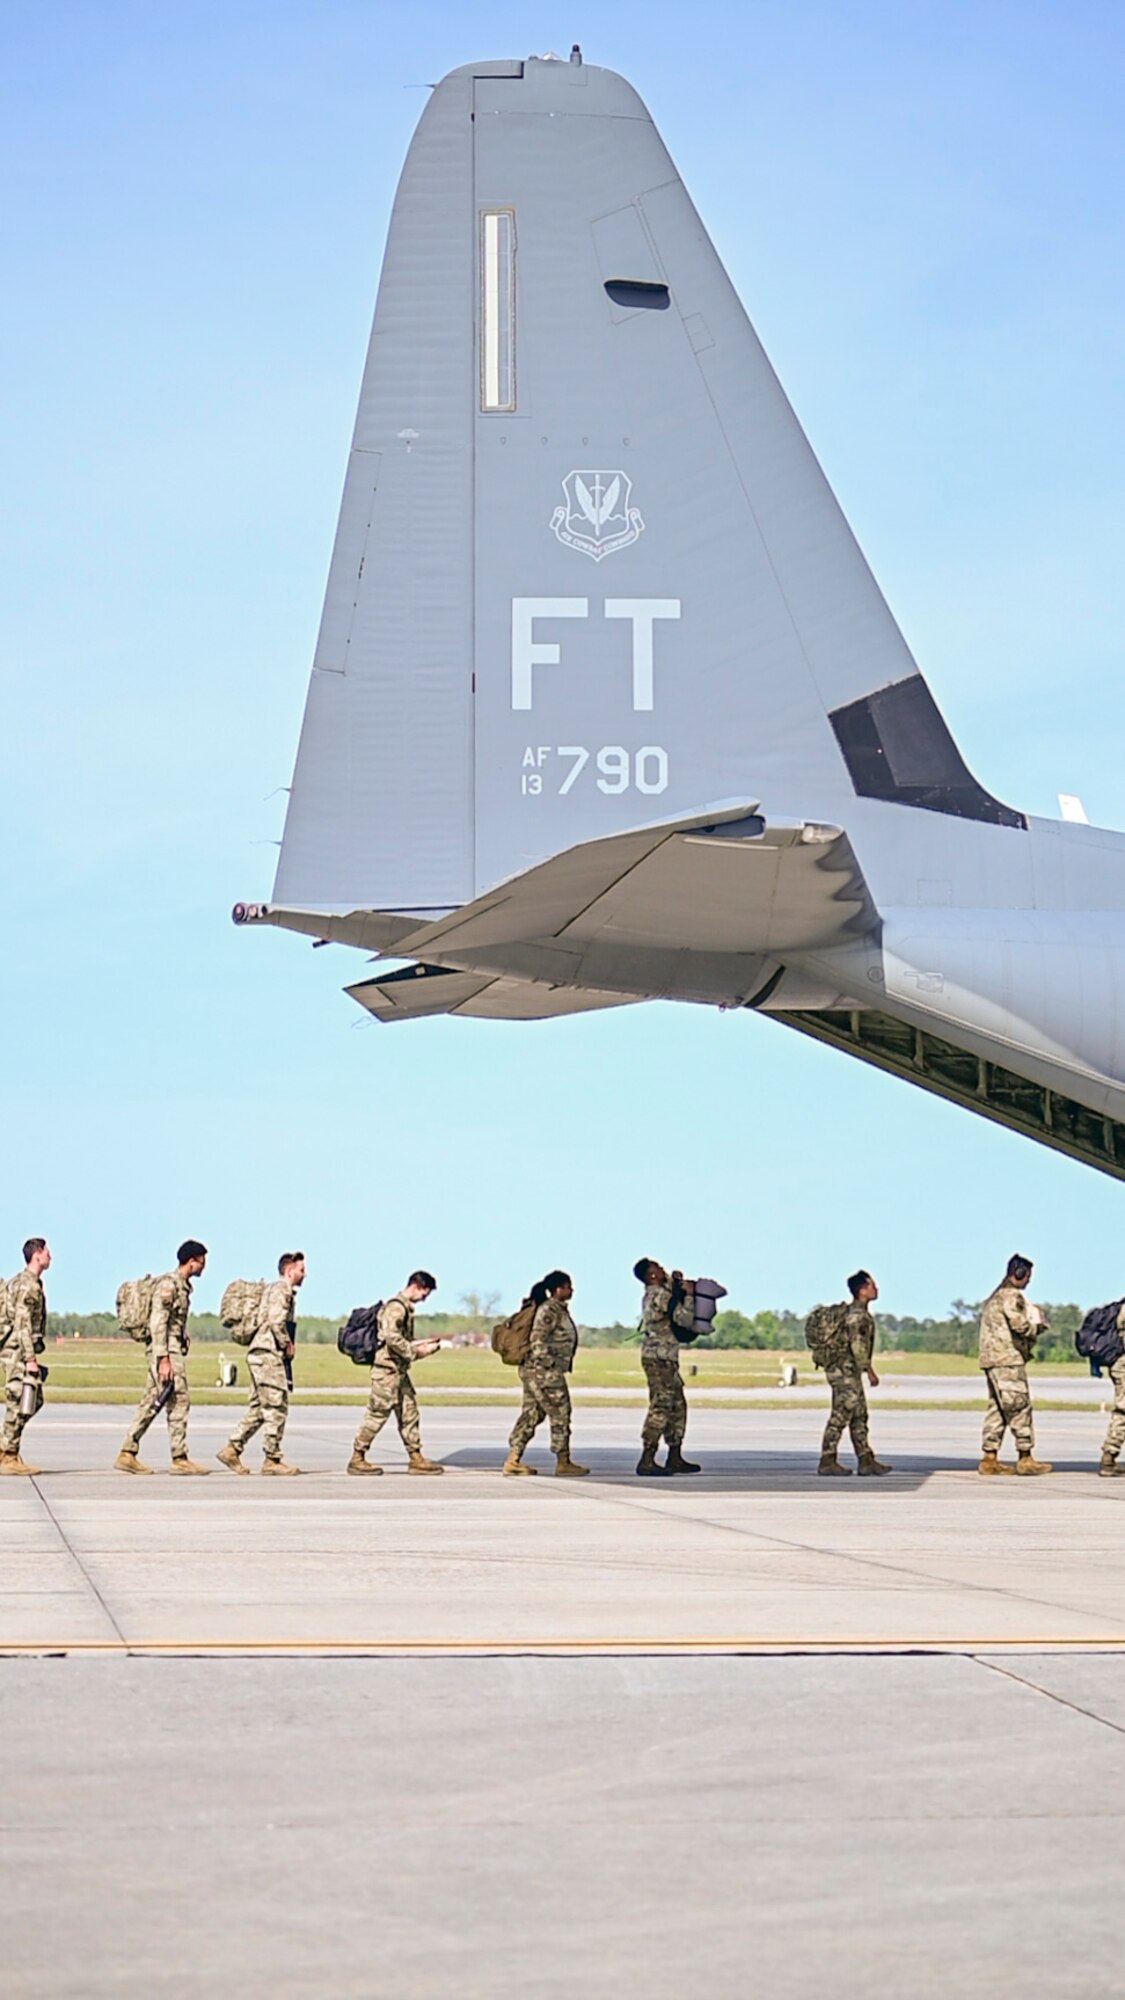 U.S Air Force Airmen from the 23rd Wing prepare to board an HC-130J Combat King II during Exercise Ready Tiger 24-1 at Moody Air Force Base, Georgia, April 8, 2024. Airmen from the 23rd Wing are organized, trained, and equipped to deploy to contingency locations across the world and execute their duties in full. Built upon Air Combat Command's directive to assert air power in contested environments, Exercise Ready Tiger 24-1 aims to test and enhance the 23rd Wing’s proficiency in executing Lead Wing and Expeditionary Air Base concepts through Agile Combat Employment and command and control operations. (U.S. Air Force photo by 2nd Lt. Benjamin Williams)